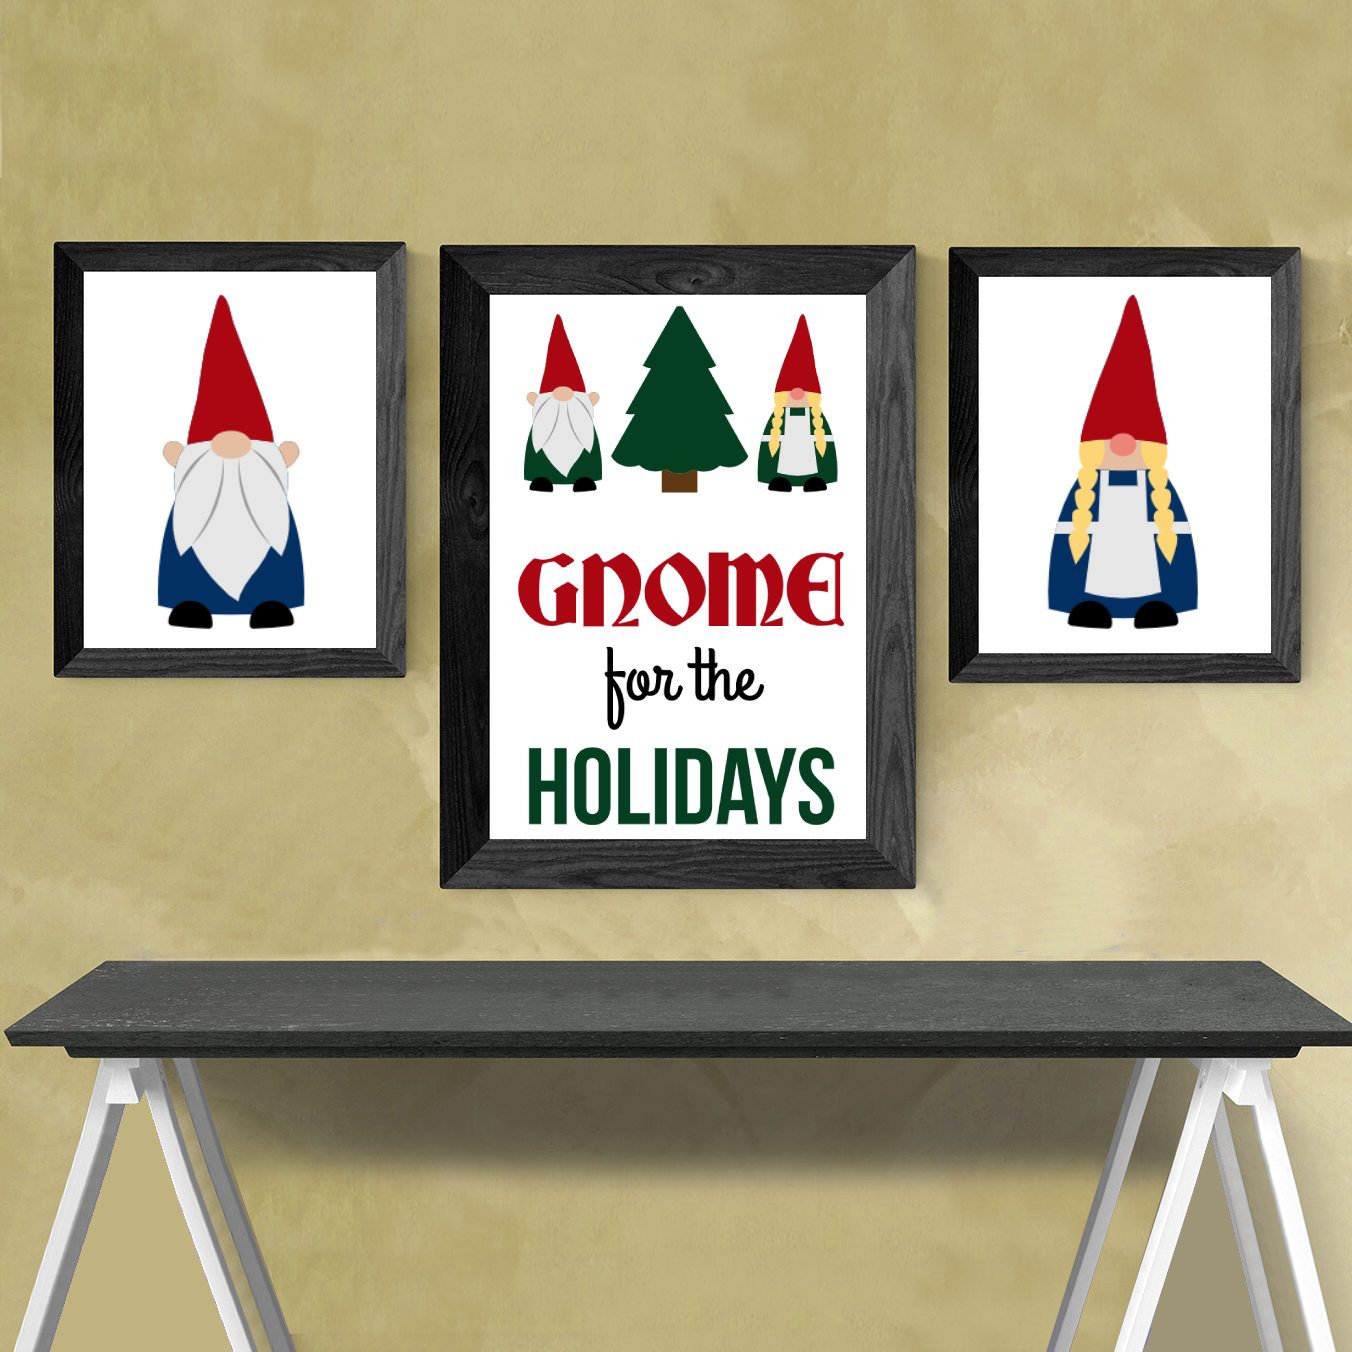 Three framed posters over a table. The middle has two gnomes with a tree and says "Gnome for the holidays." One gnome has braids, the other has a beard. At the left and right are larger versions of the boy and girl gnomes.